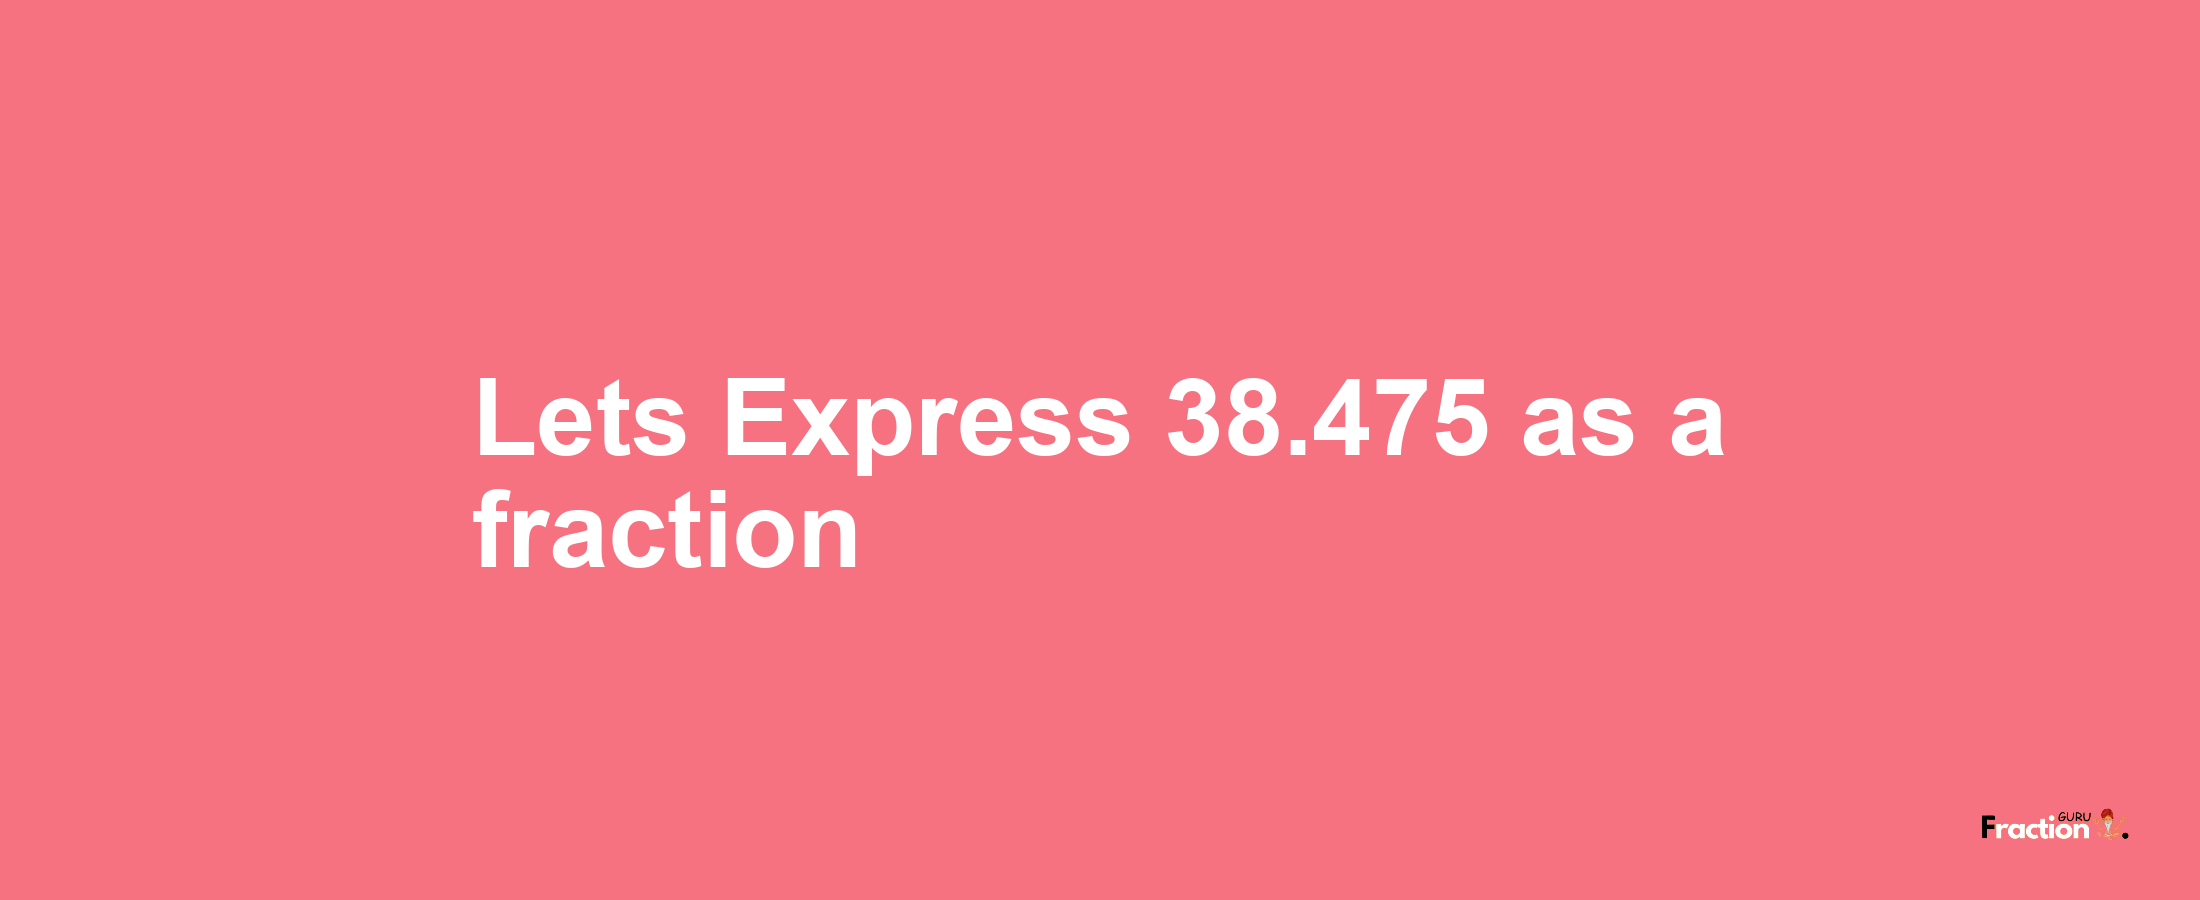 Lets Express 38.475 as afraction